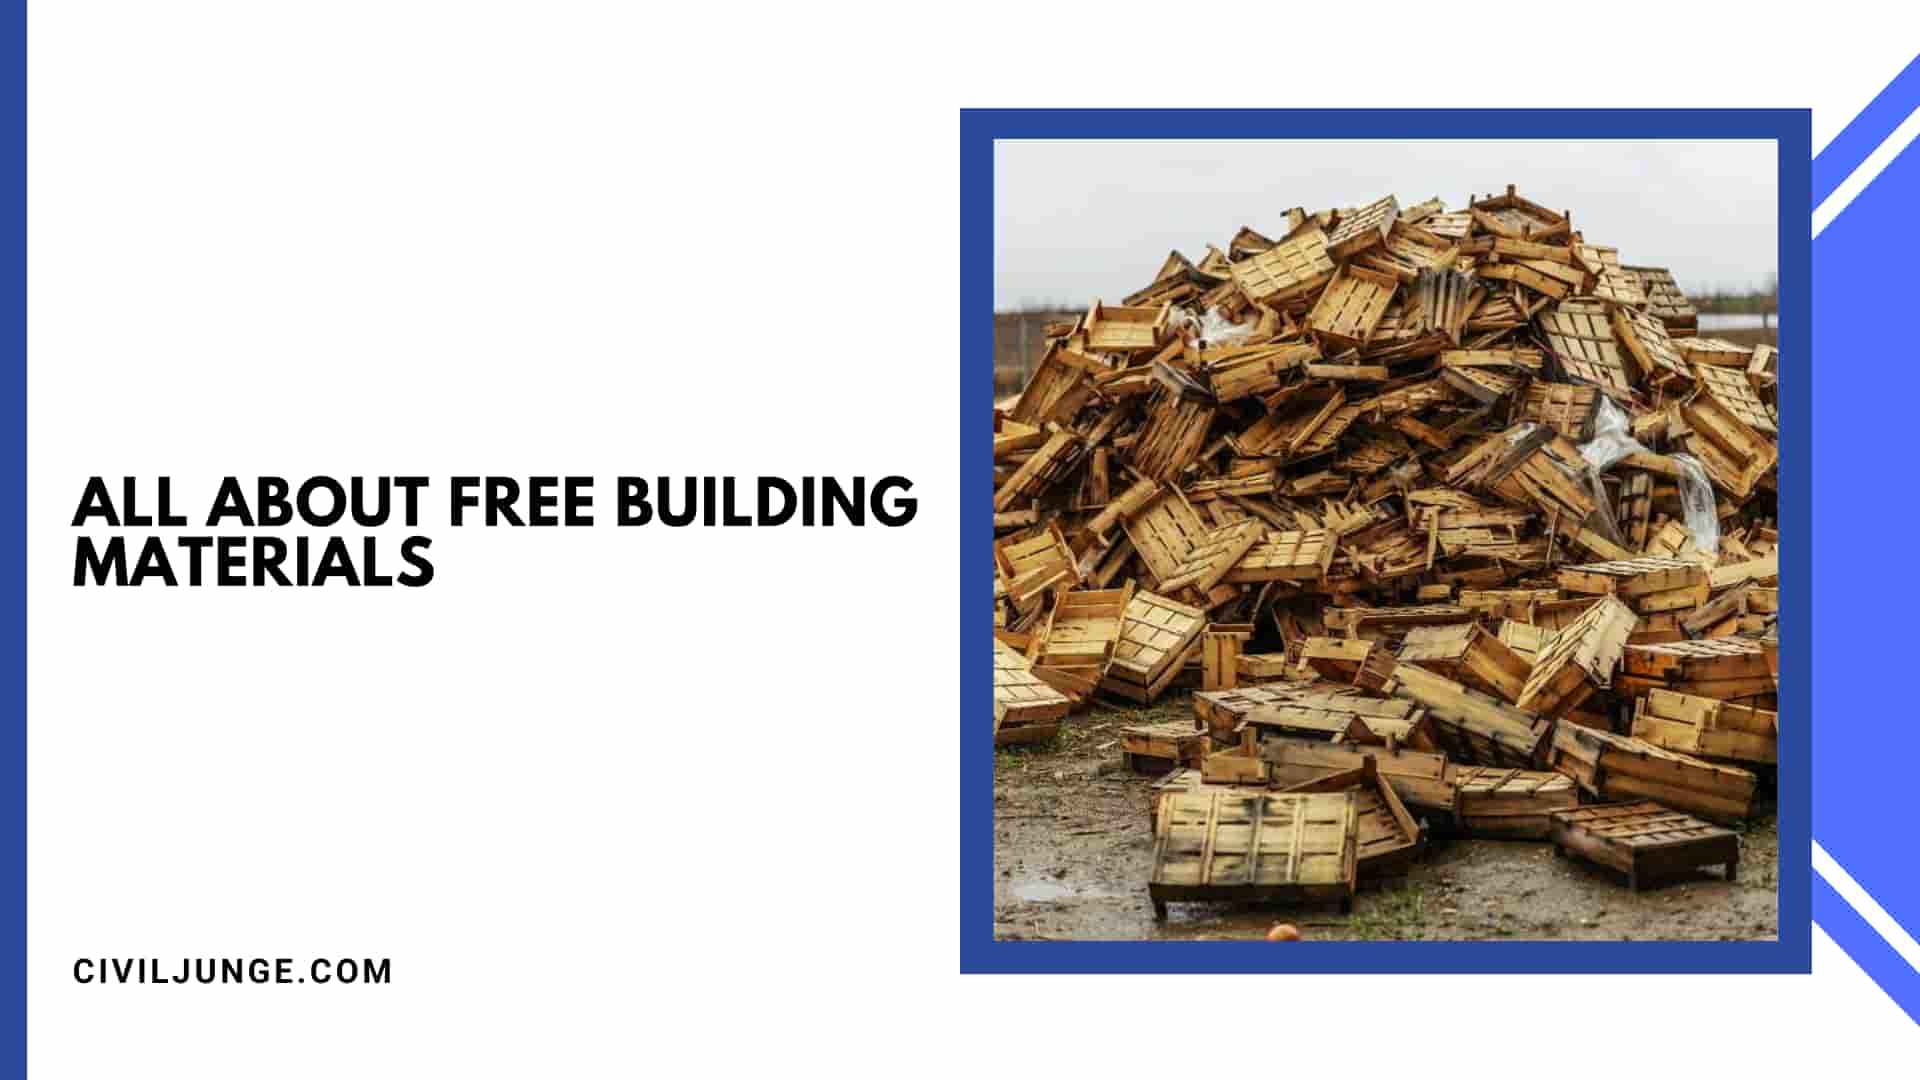 All About Free Building Materials